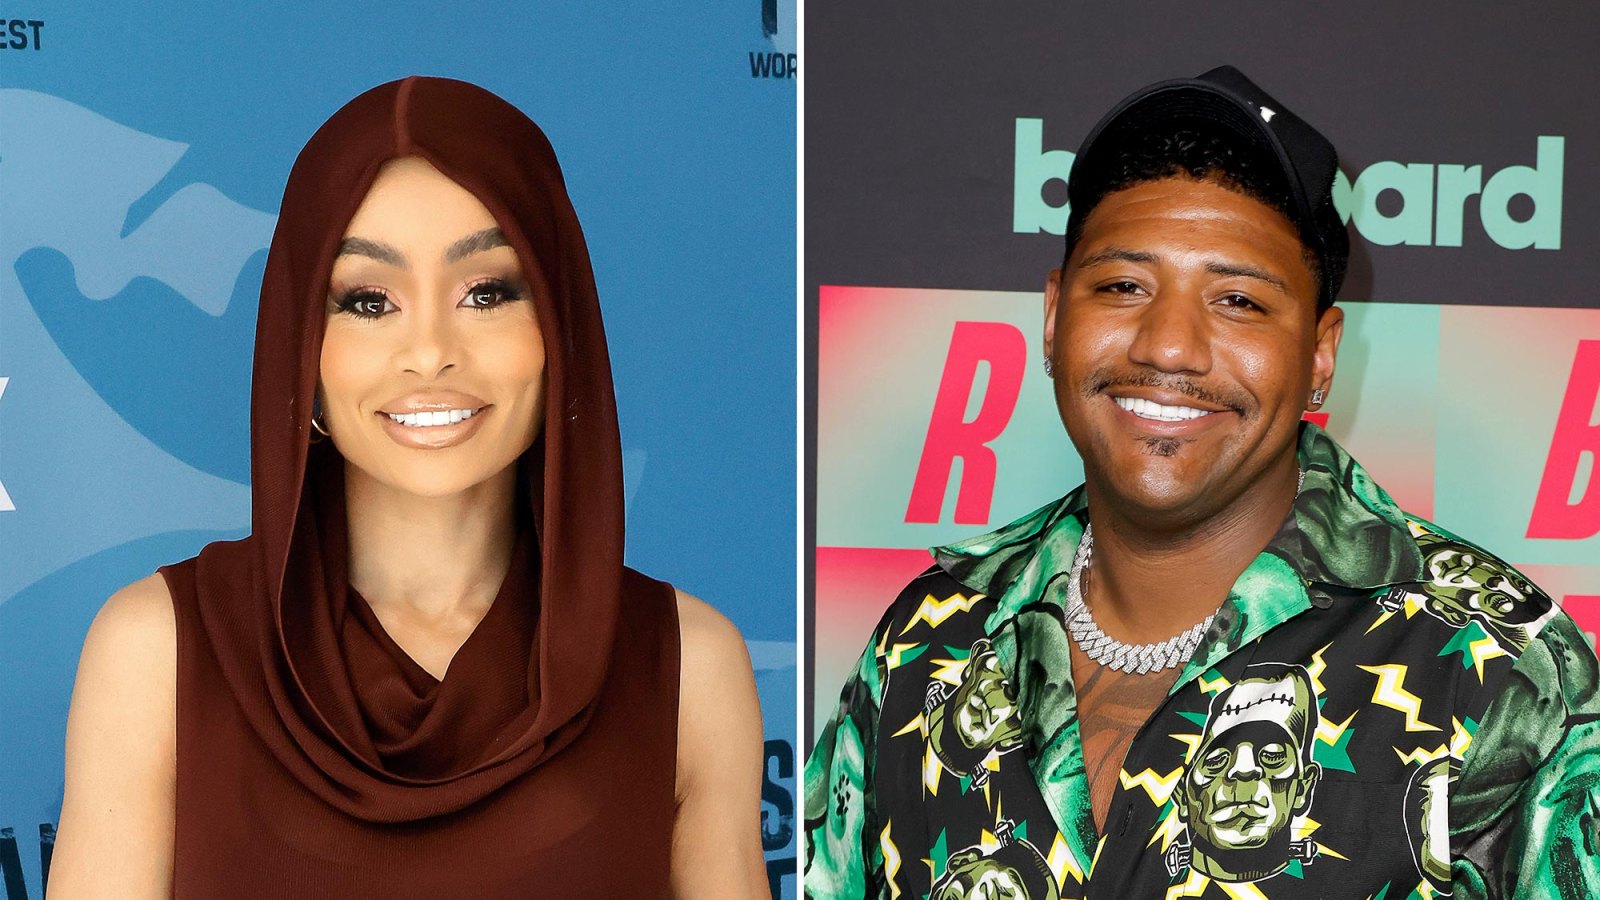 Blac Chyna and Derrick Milano Declare Love for Each Other With Romantic Instagram Posts 300